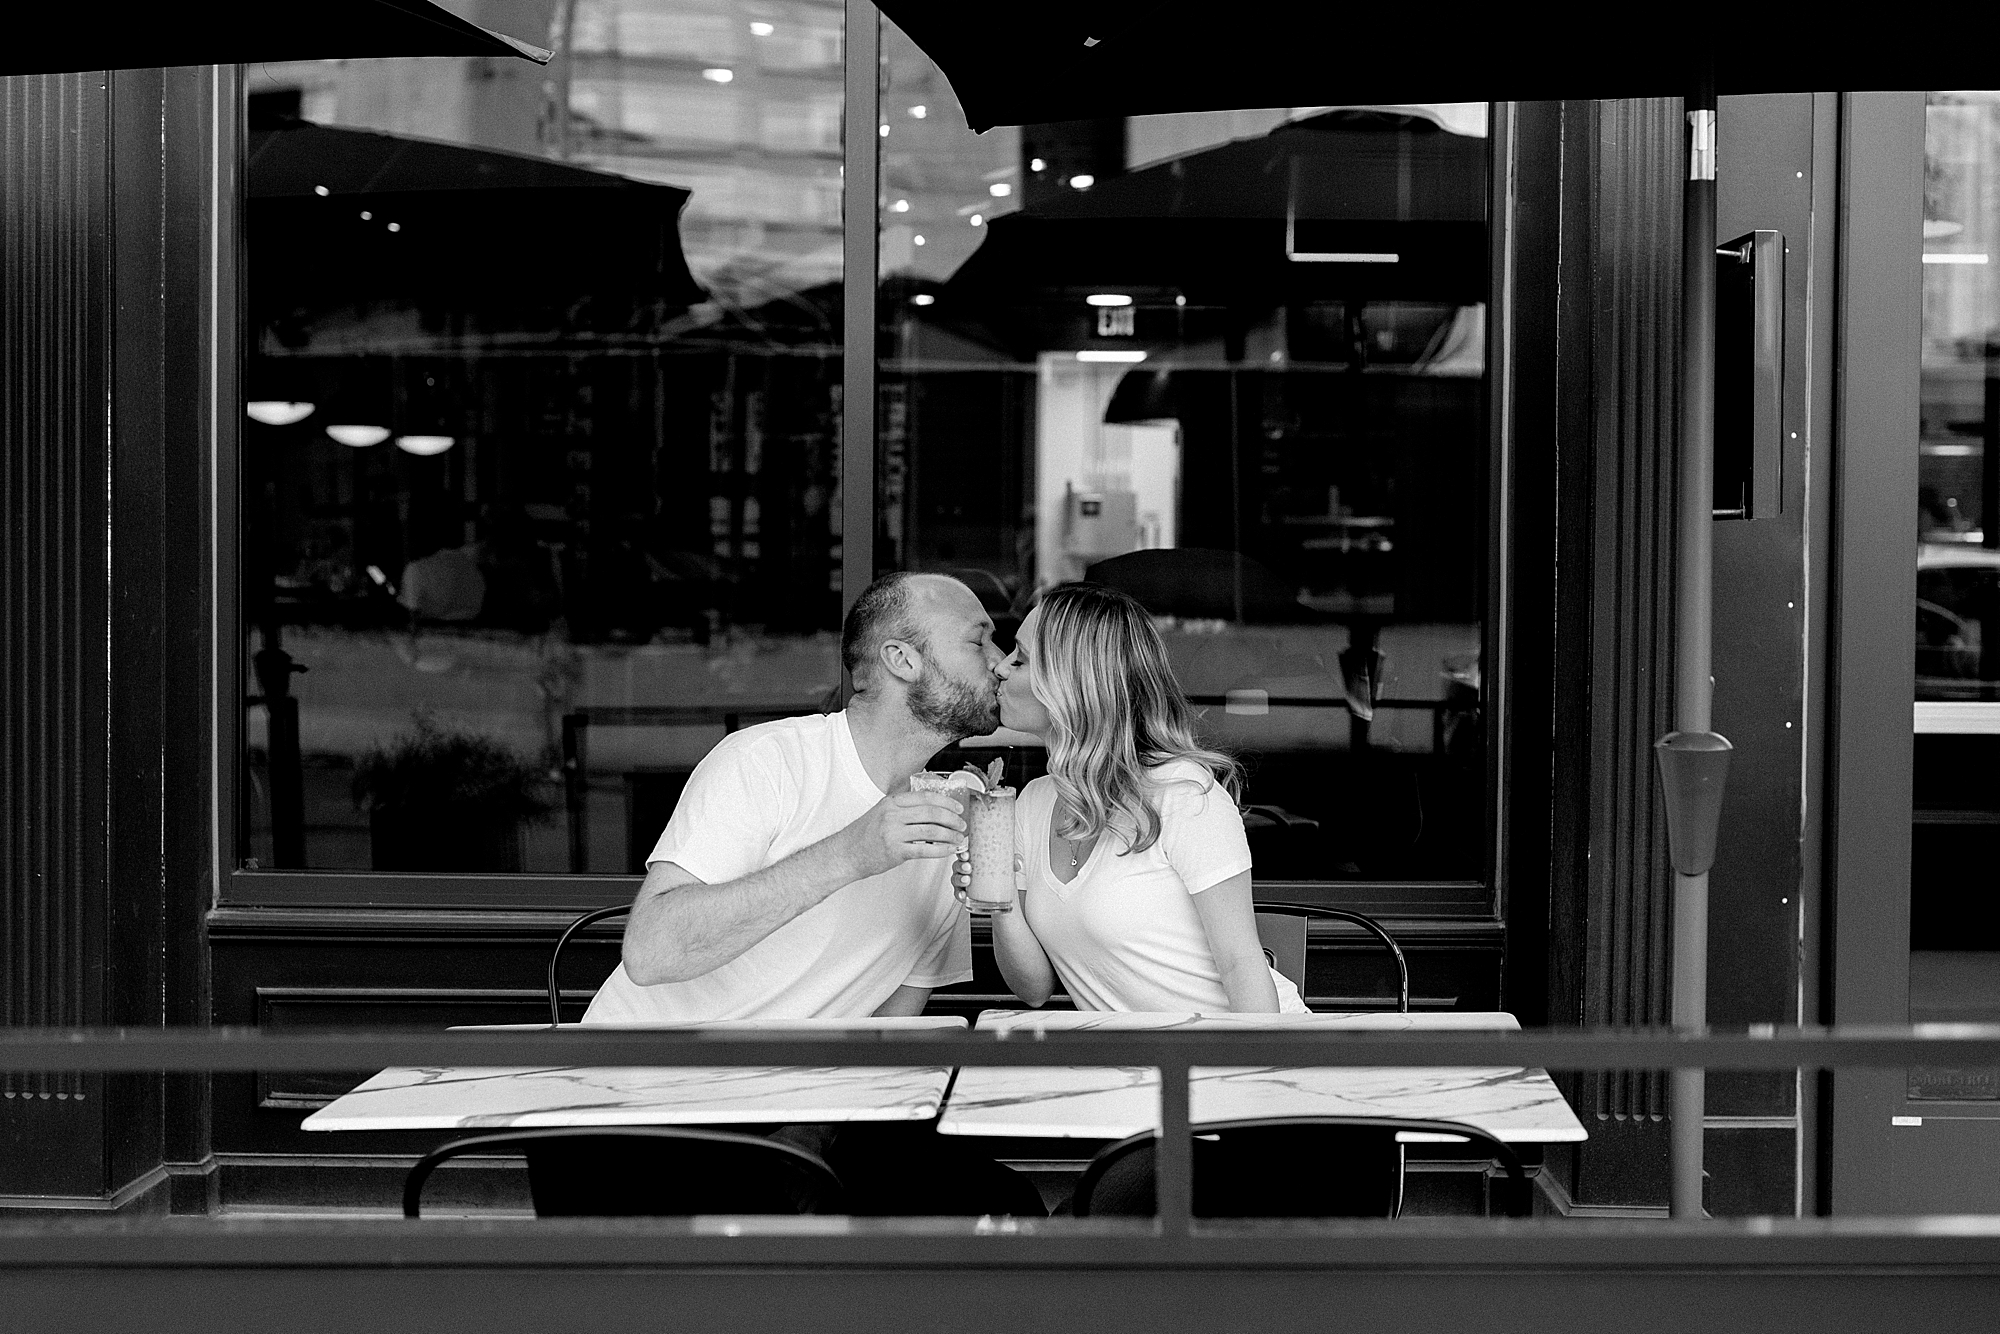 Stopped for a drink during the engagement photo shoot in Detroit